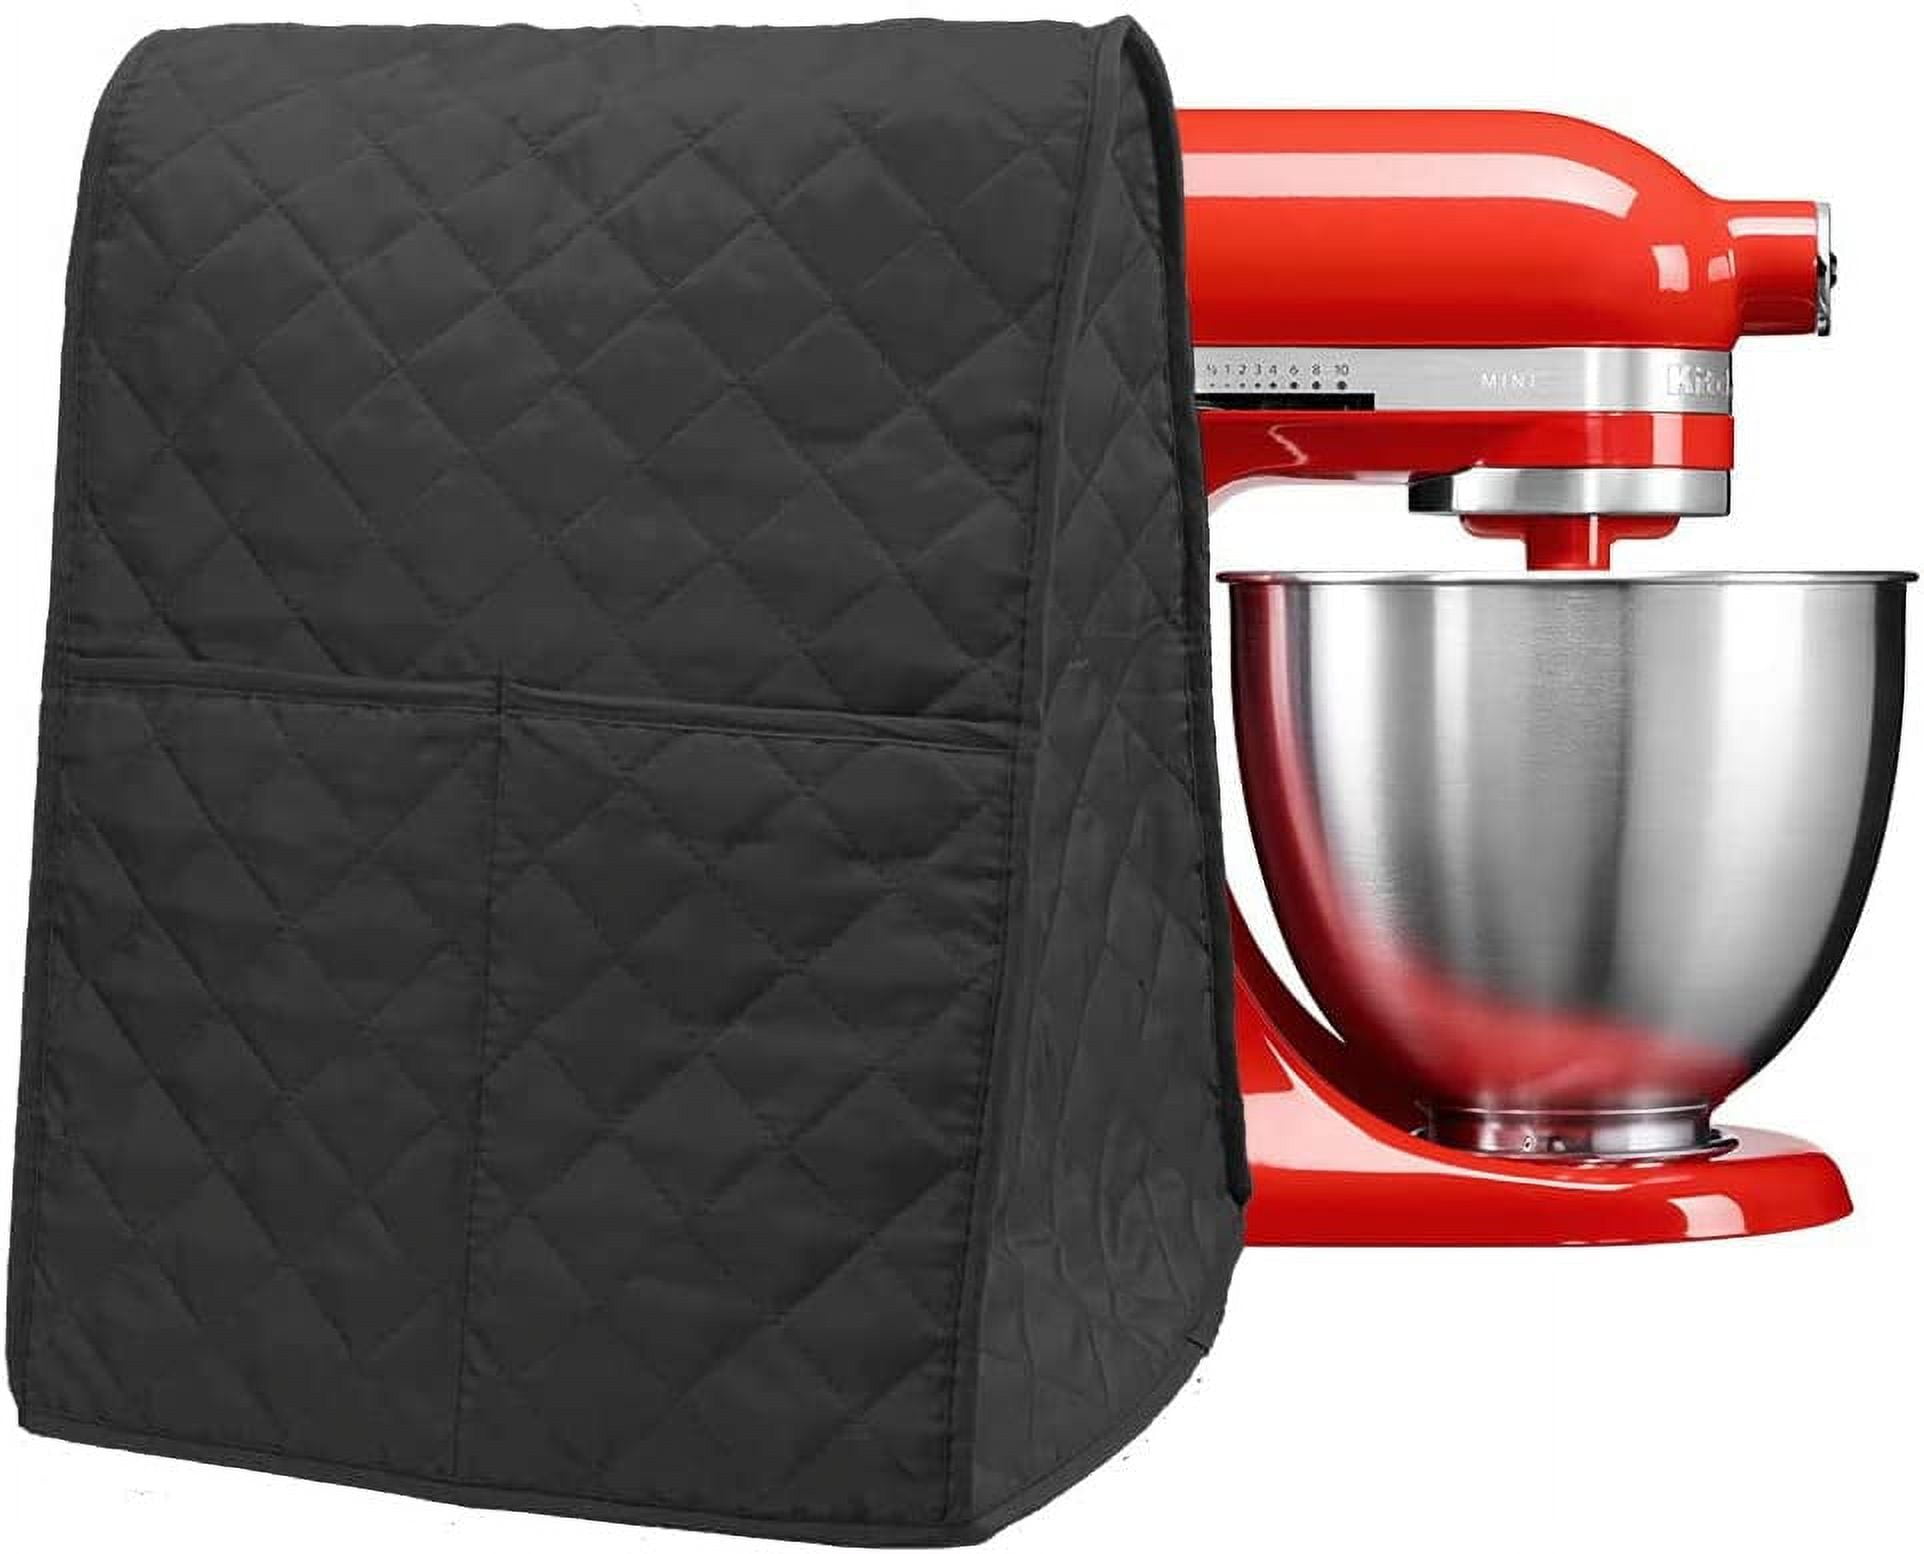 Mixer Cover,Stand Mixer Dust-proof Cover,with Organizer Bag for Kitchenaid,  Sunbeam, Cuisinart,bowl-lift, Tilt-Head Stand Mixer(Black)